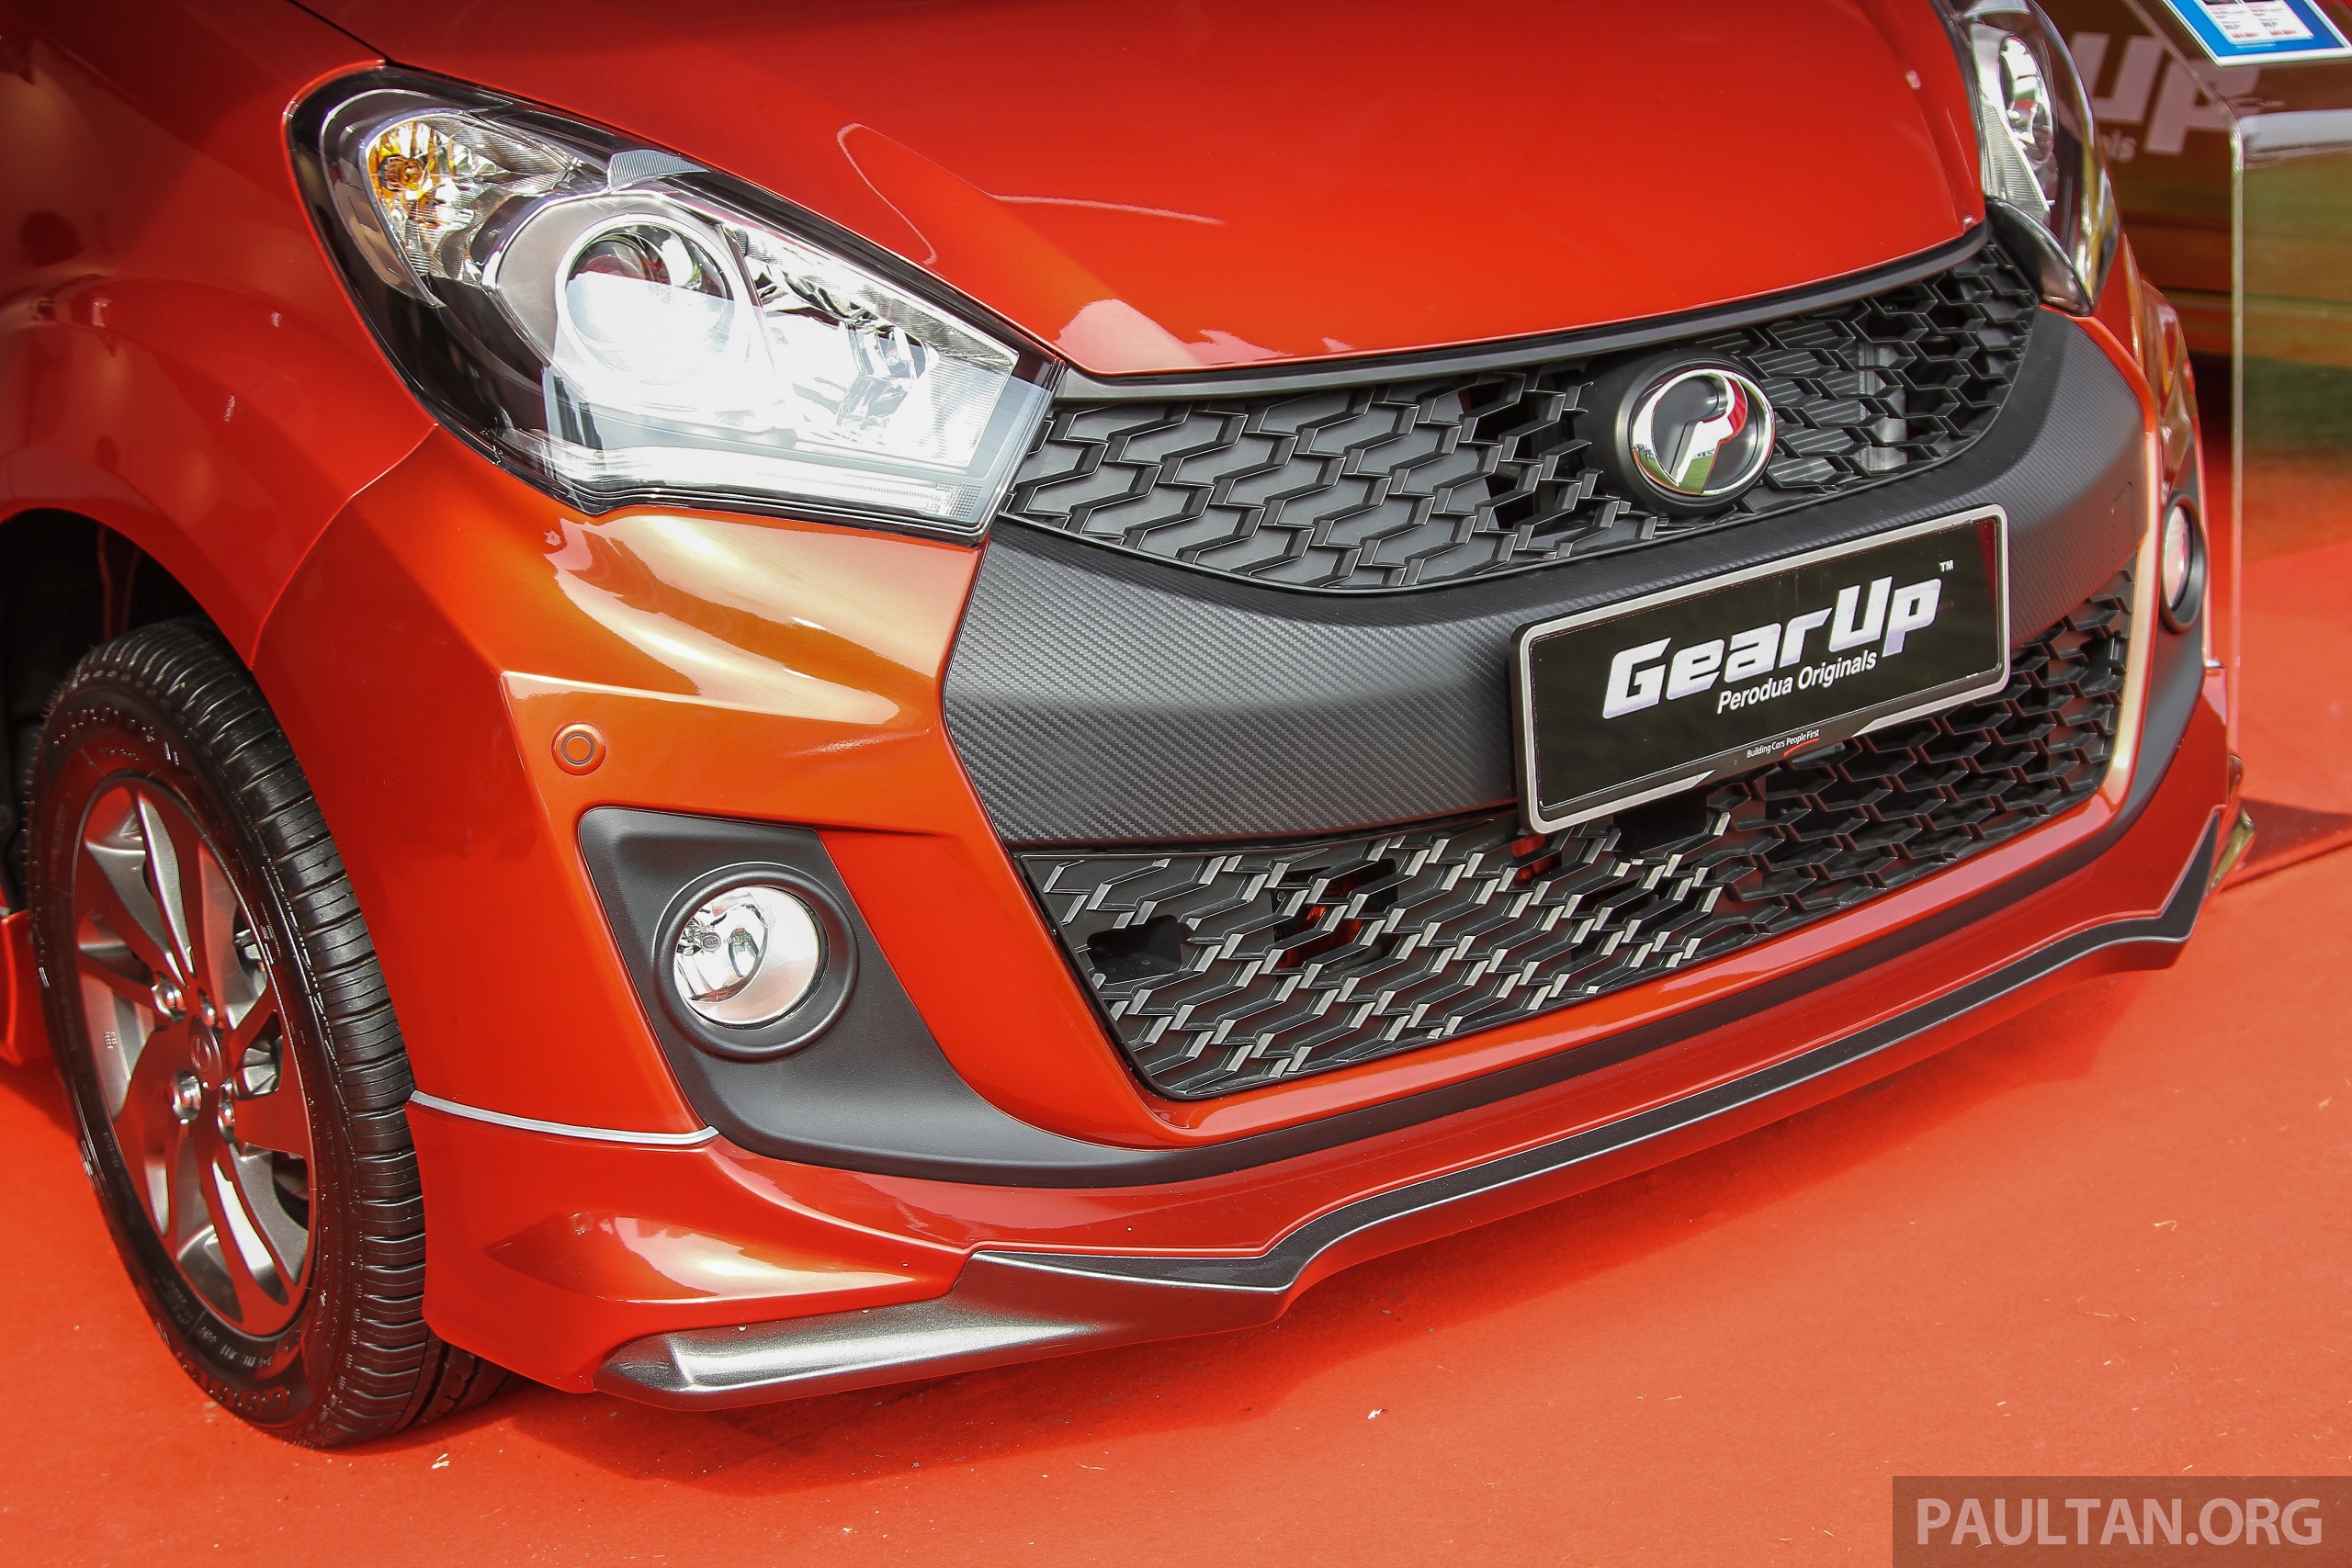 Perodua Myvi GearUp accessories – details and prices Image 